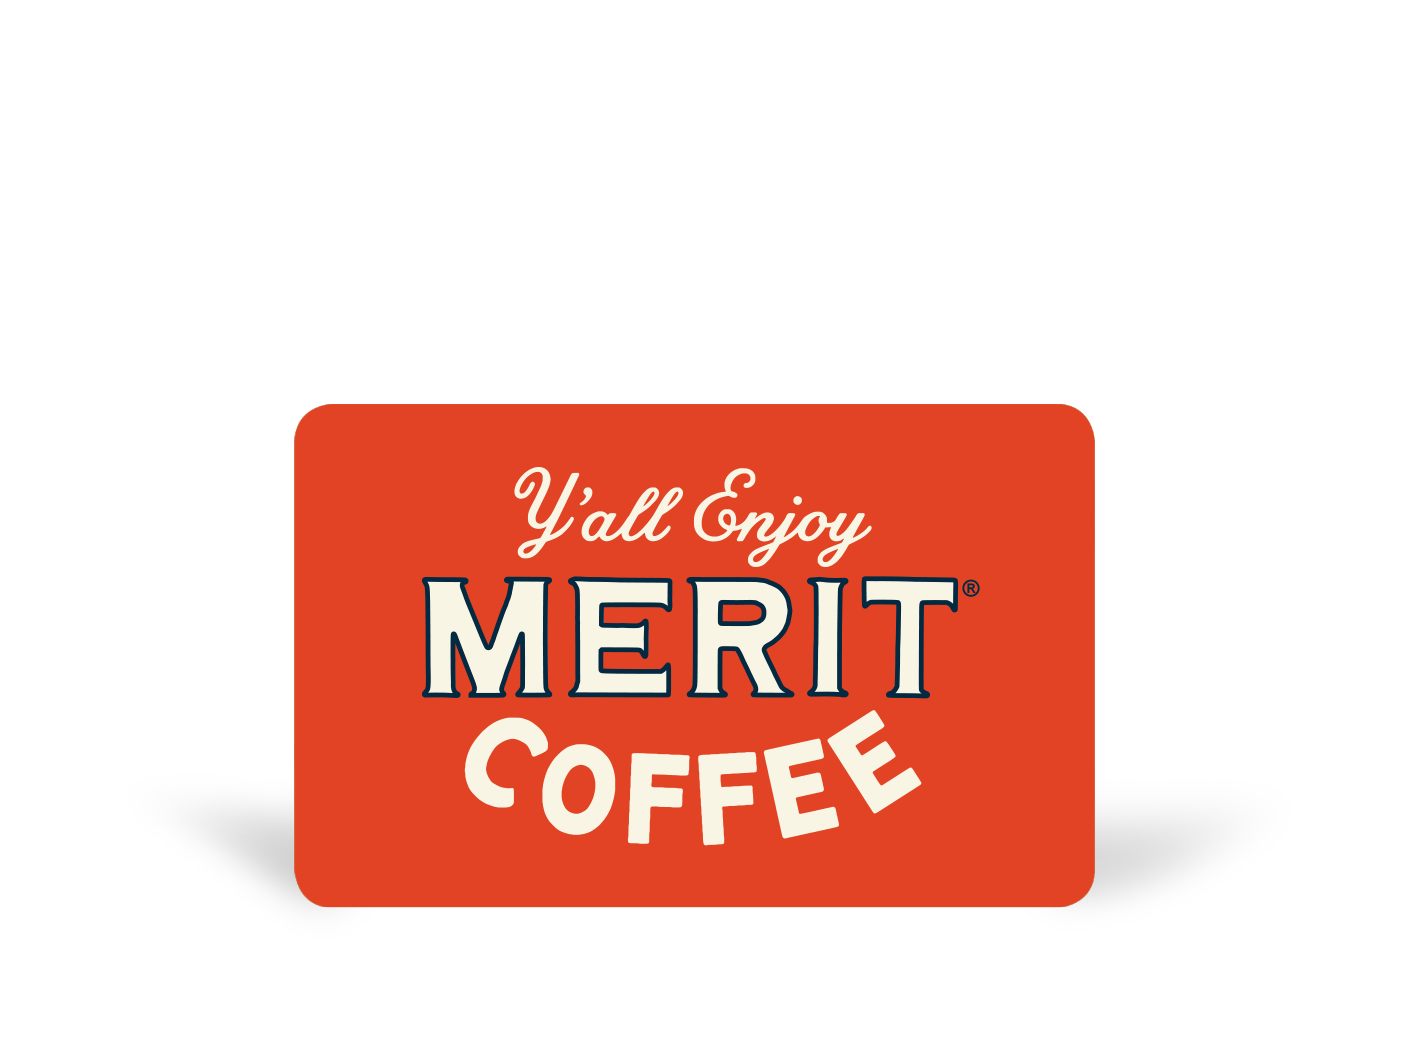 Cafe Gift Card